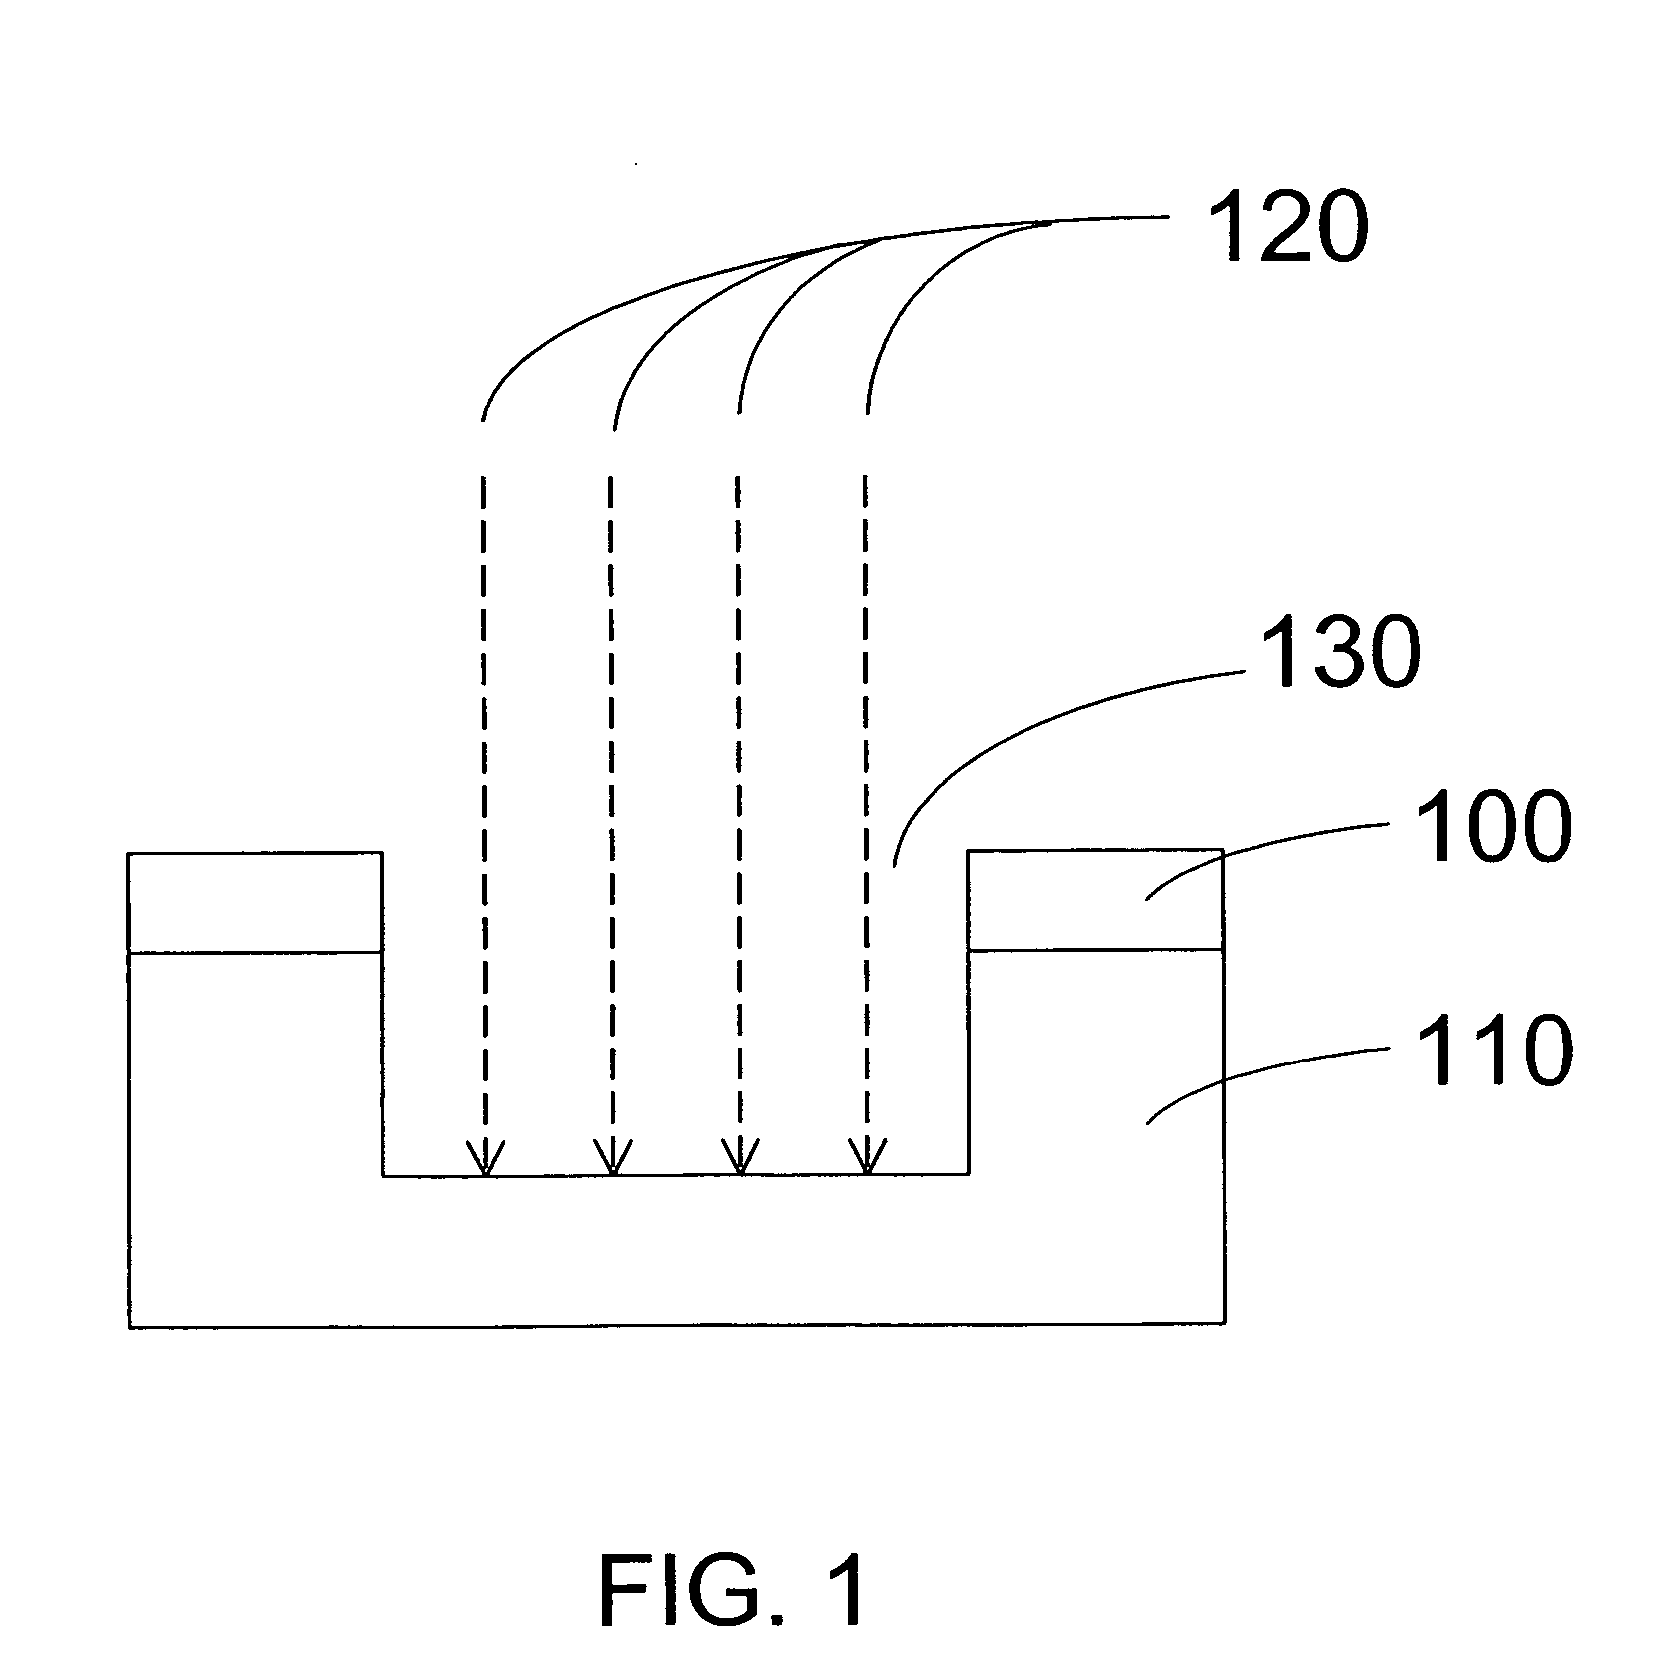 Method and apparatus for dermatological treatment